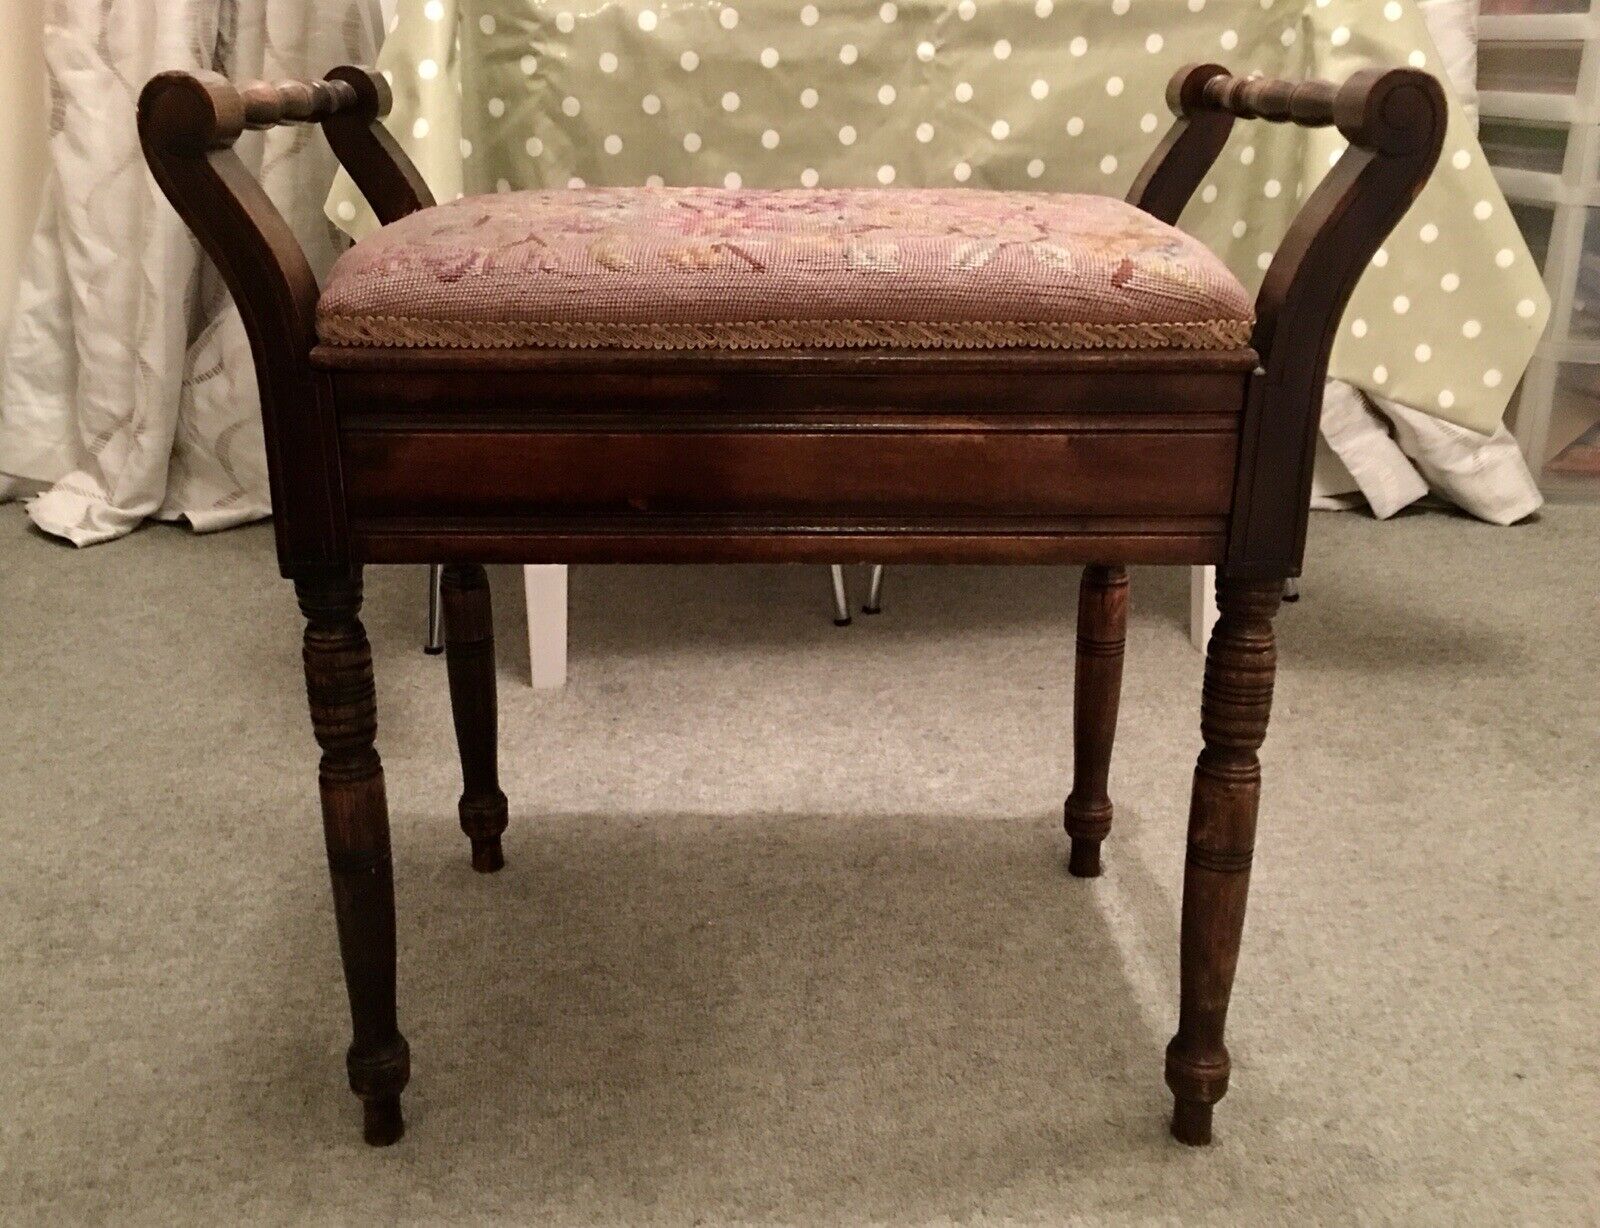 Antique Piano Stool with Tapestry Lift-Up Seat and Storage